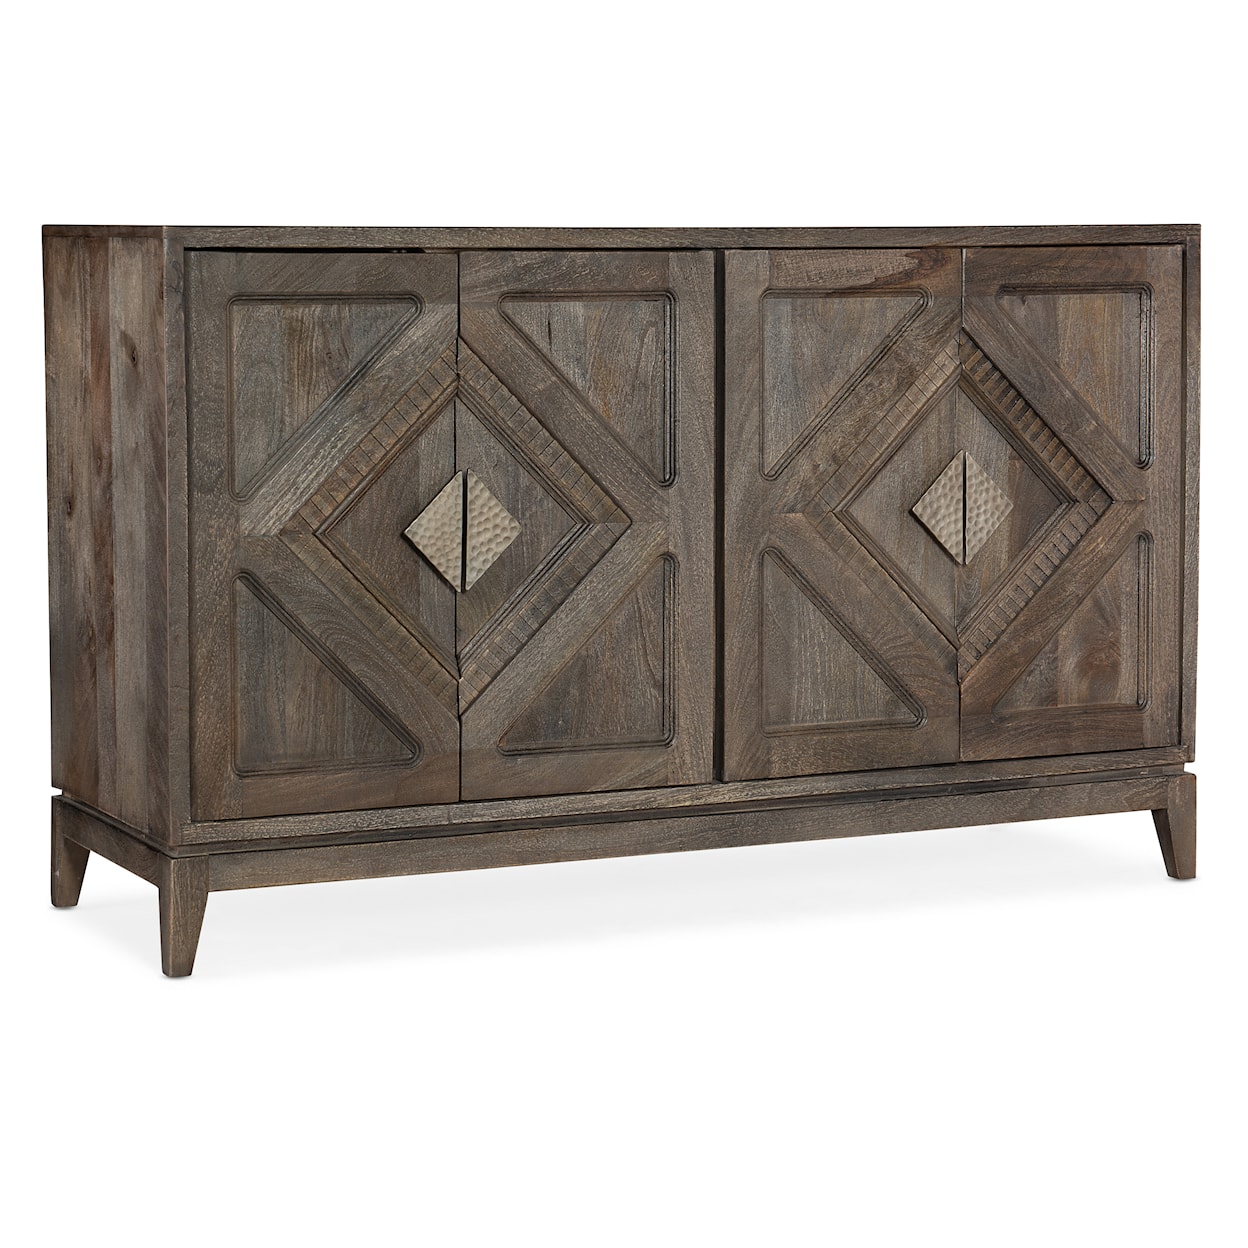 Hooker Furniture Commerce and Market Carved Accent Chest